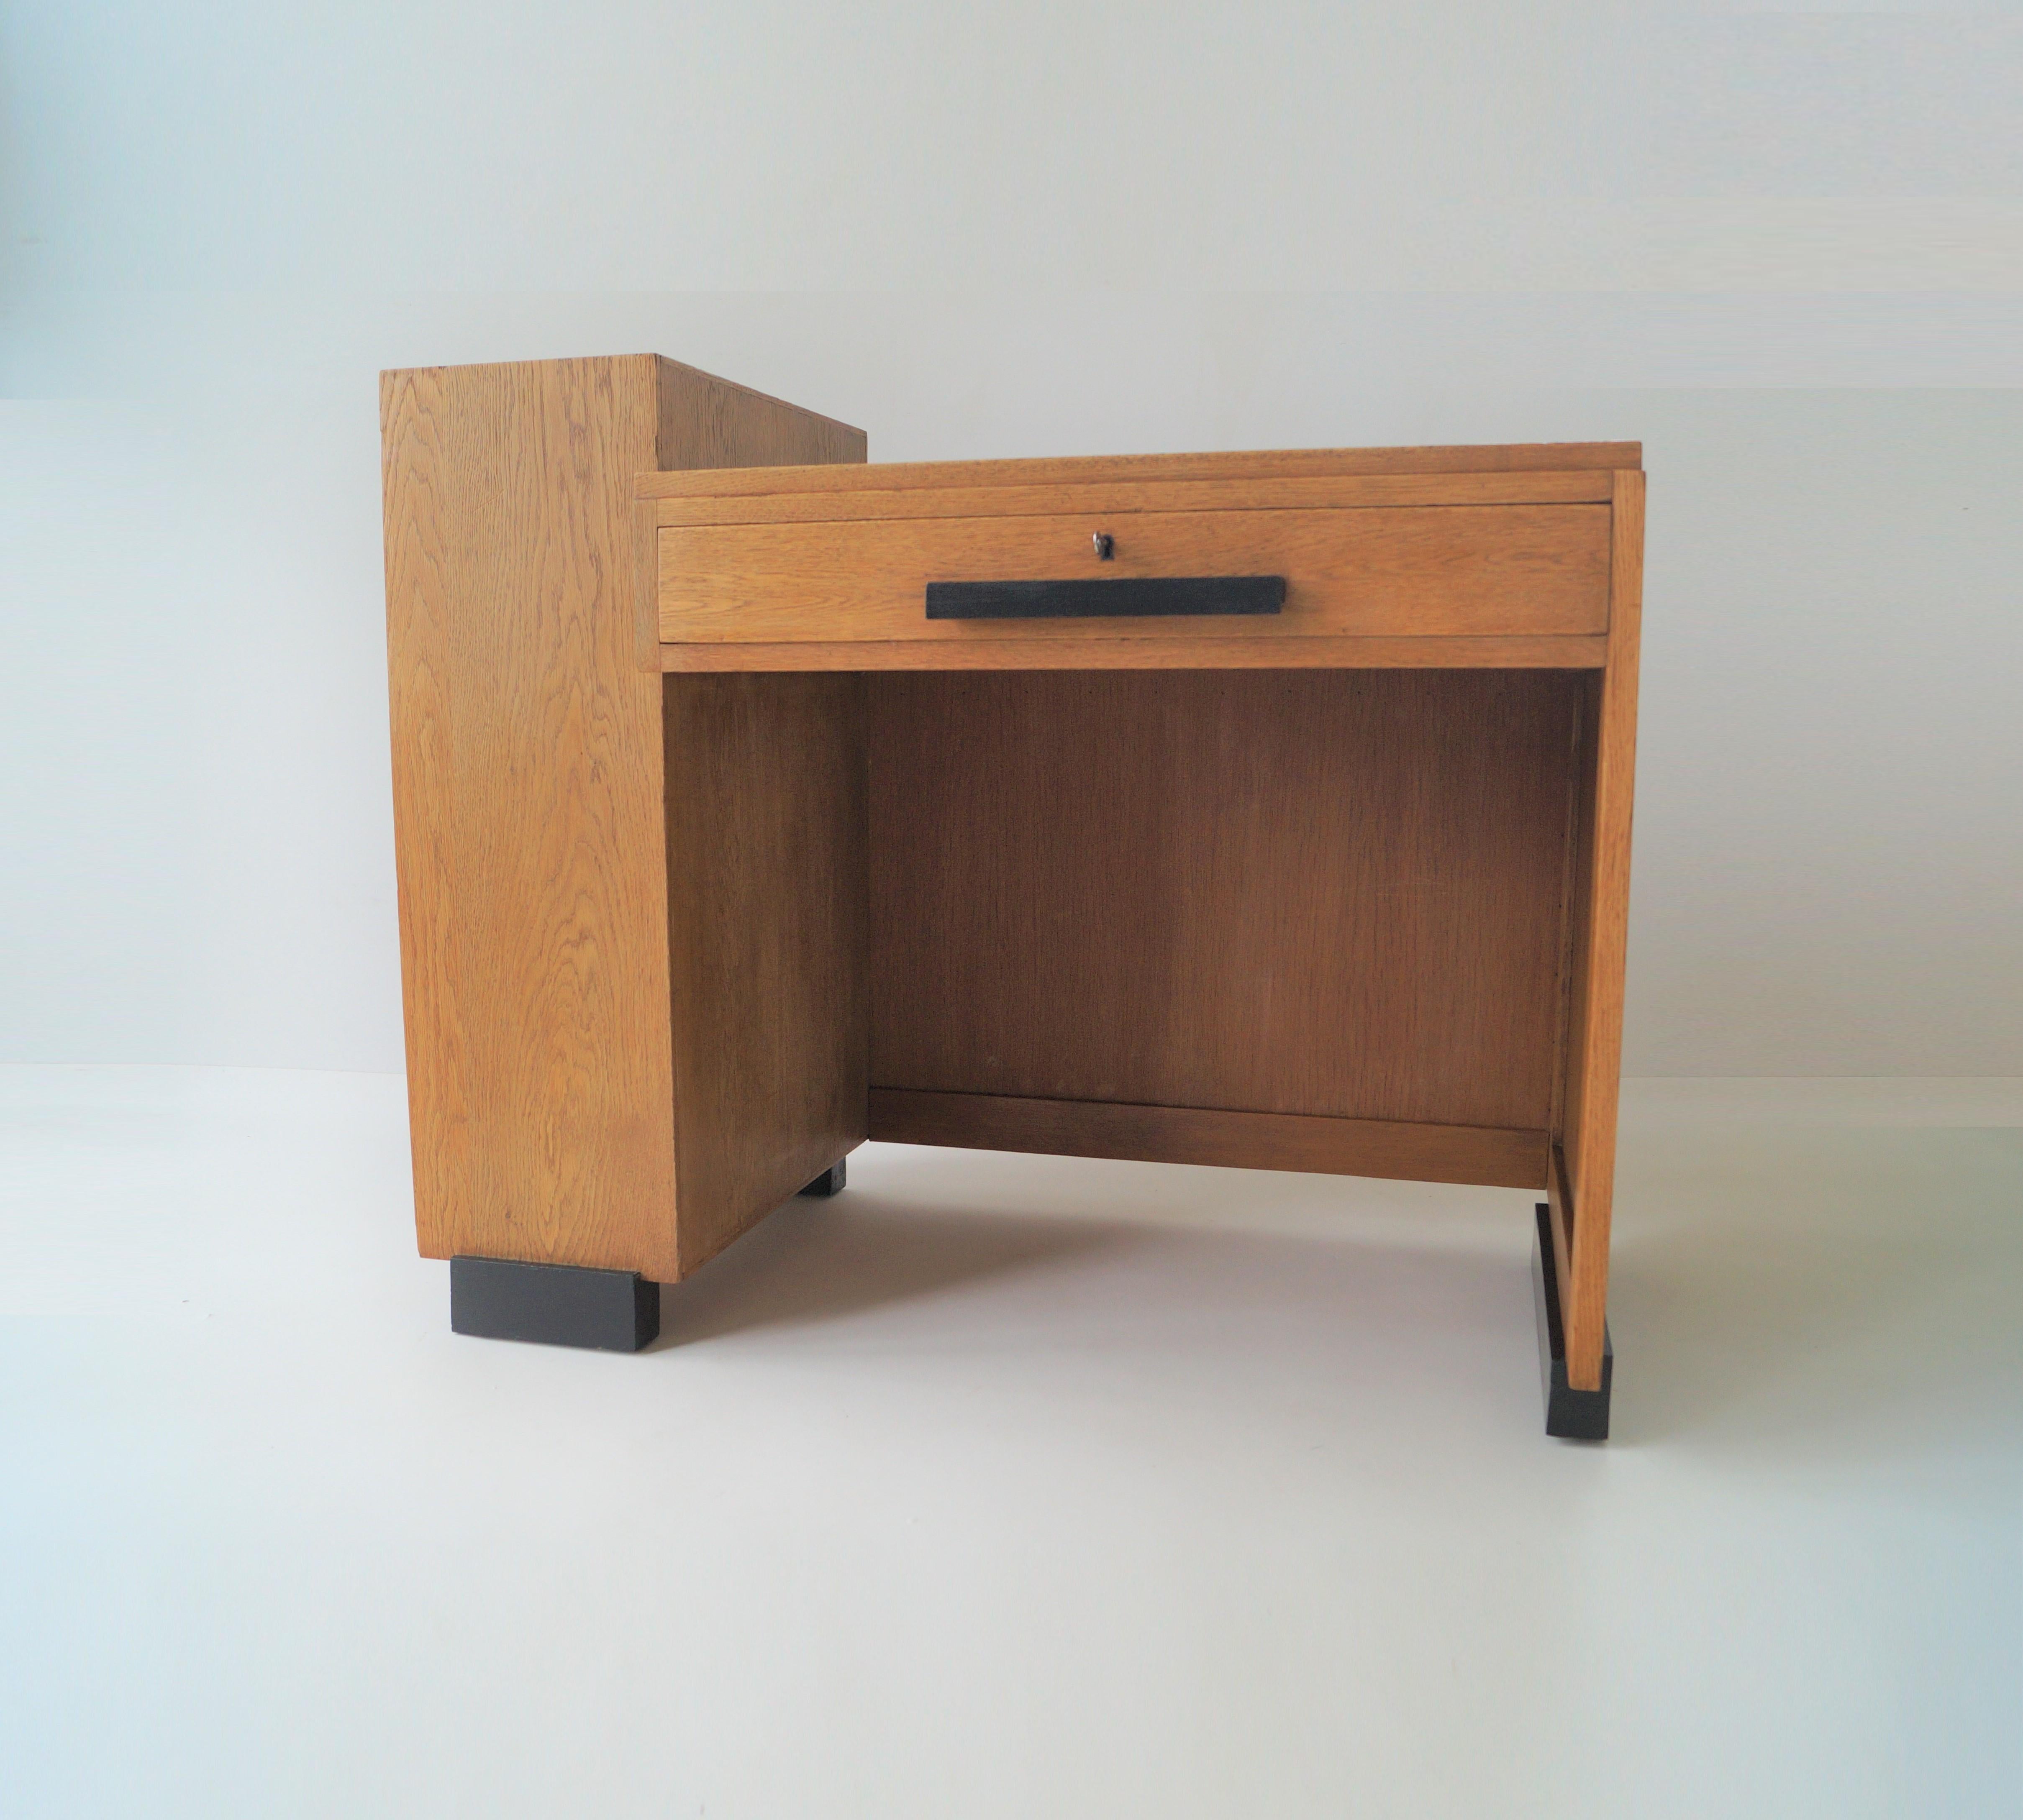 A modestly sized modernist writing desk with an assymetrical design, giving it a Haagse School/modernist appearance.

It has one large drawer at the front and a three shelve storage compartiment at the left. On the desktop a black leather inlay. The